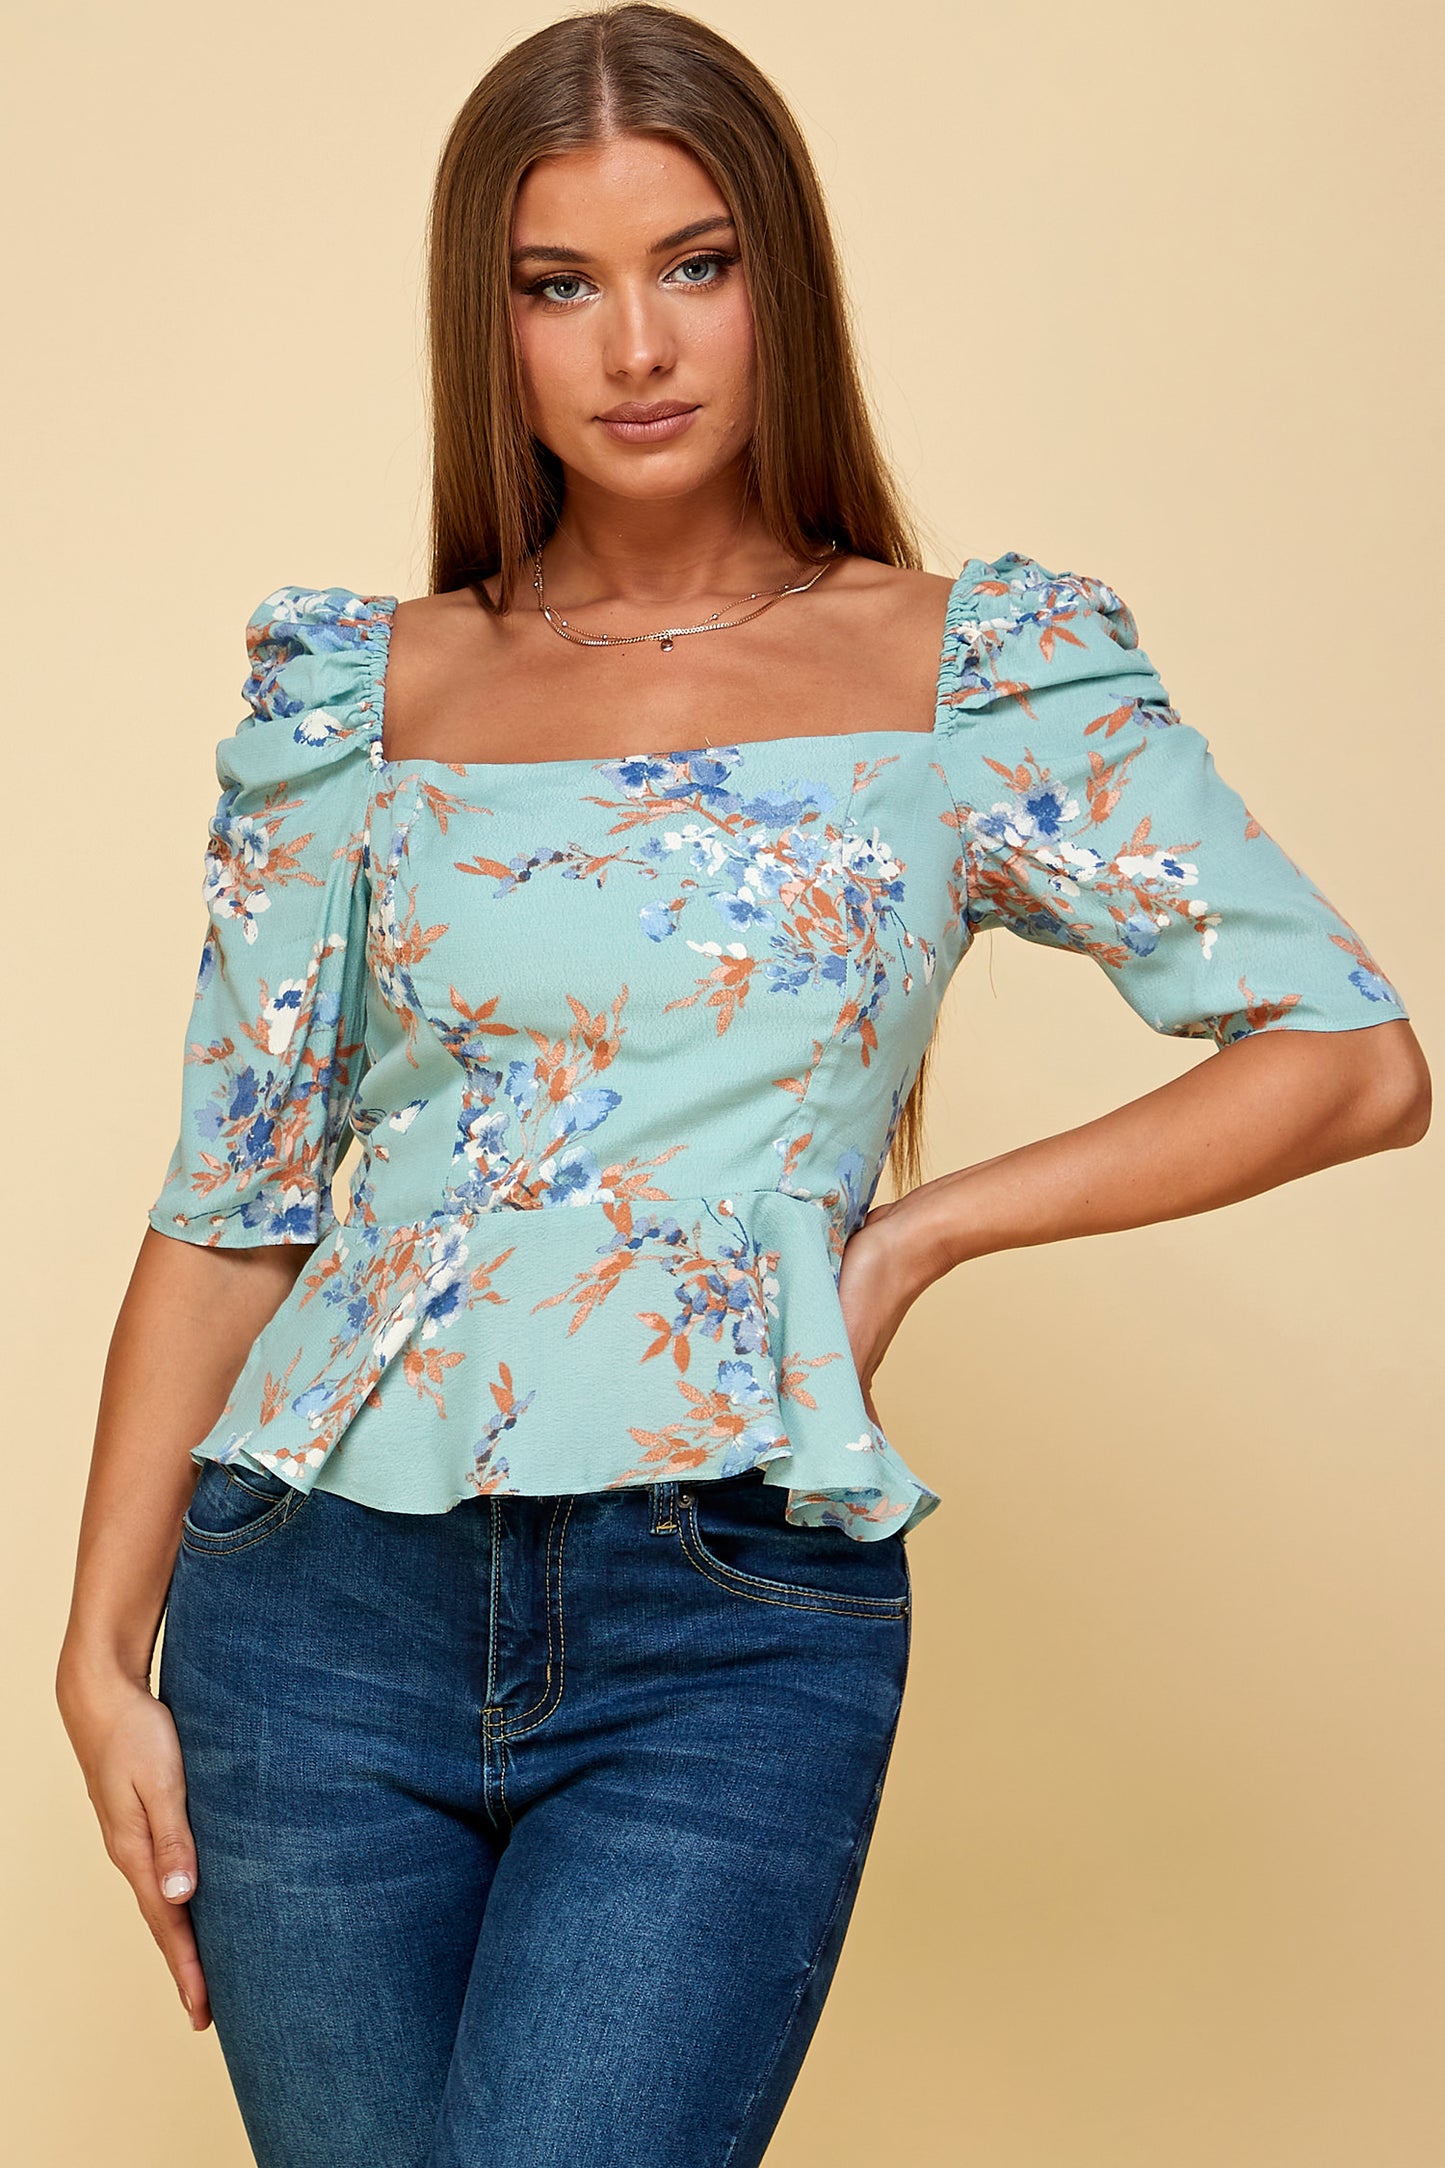 FLORAL PEPLUM TOP WITH 3/4 SLEEVES